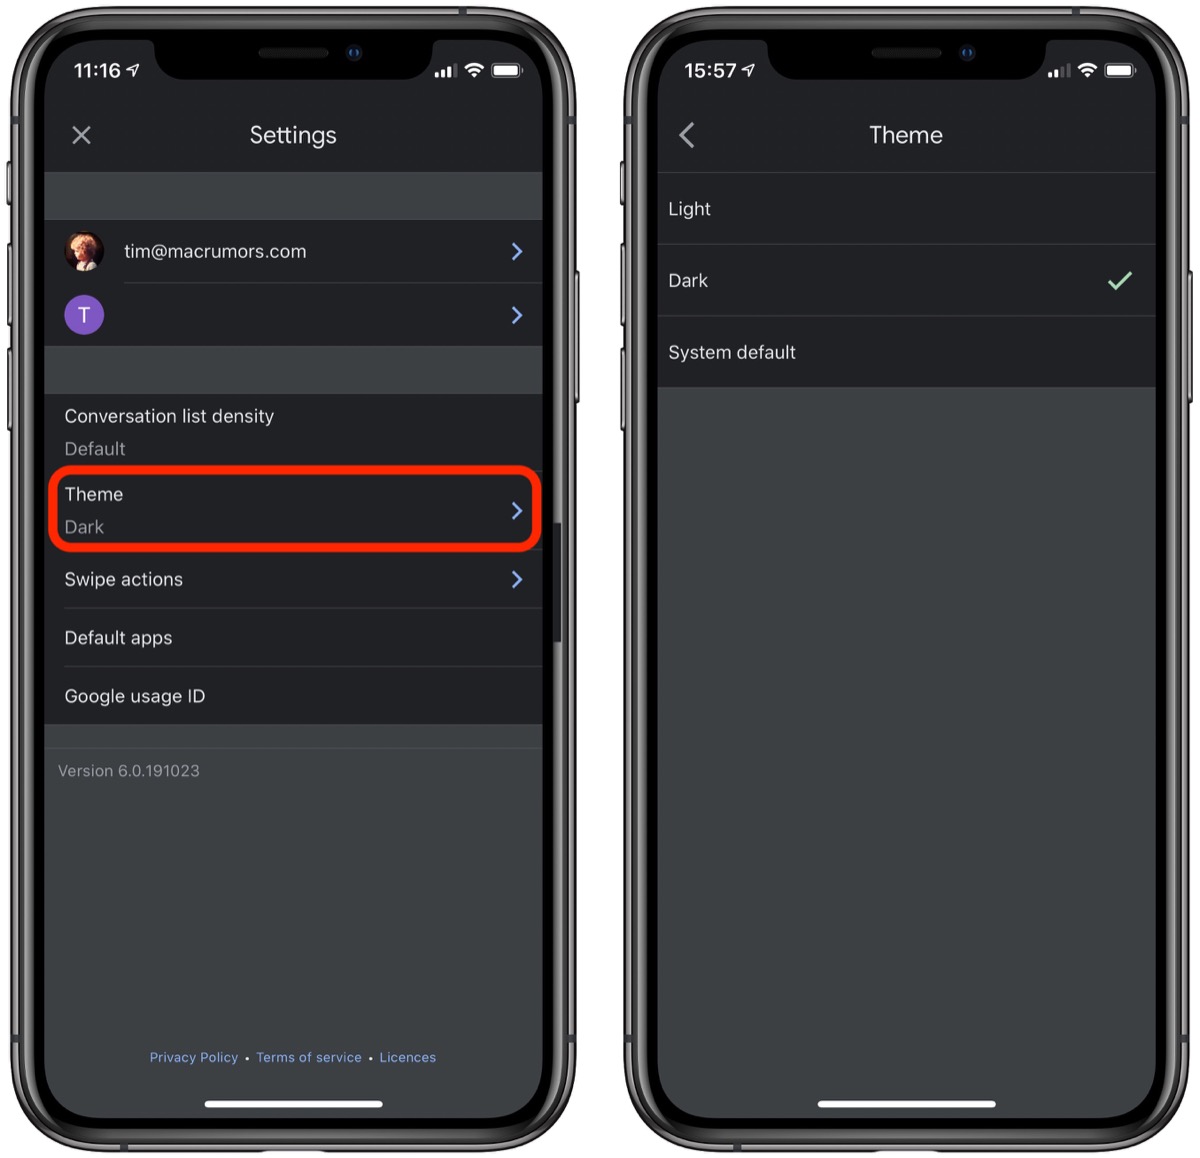 1how-to-enable-dark-mode-in-the-gmail-app-for-ios-.jpg